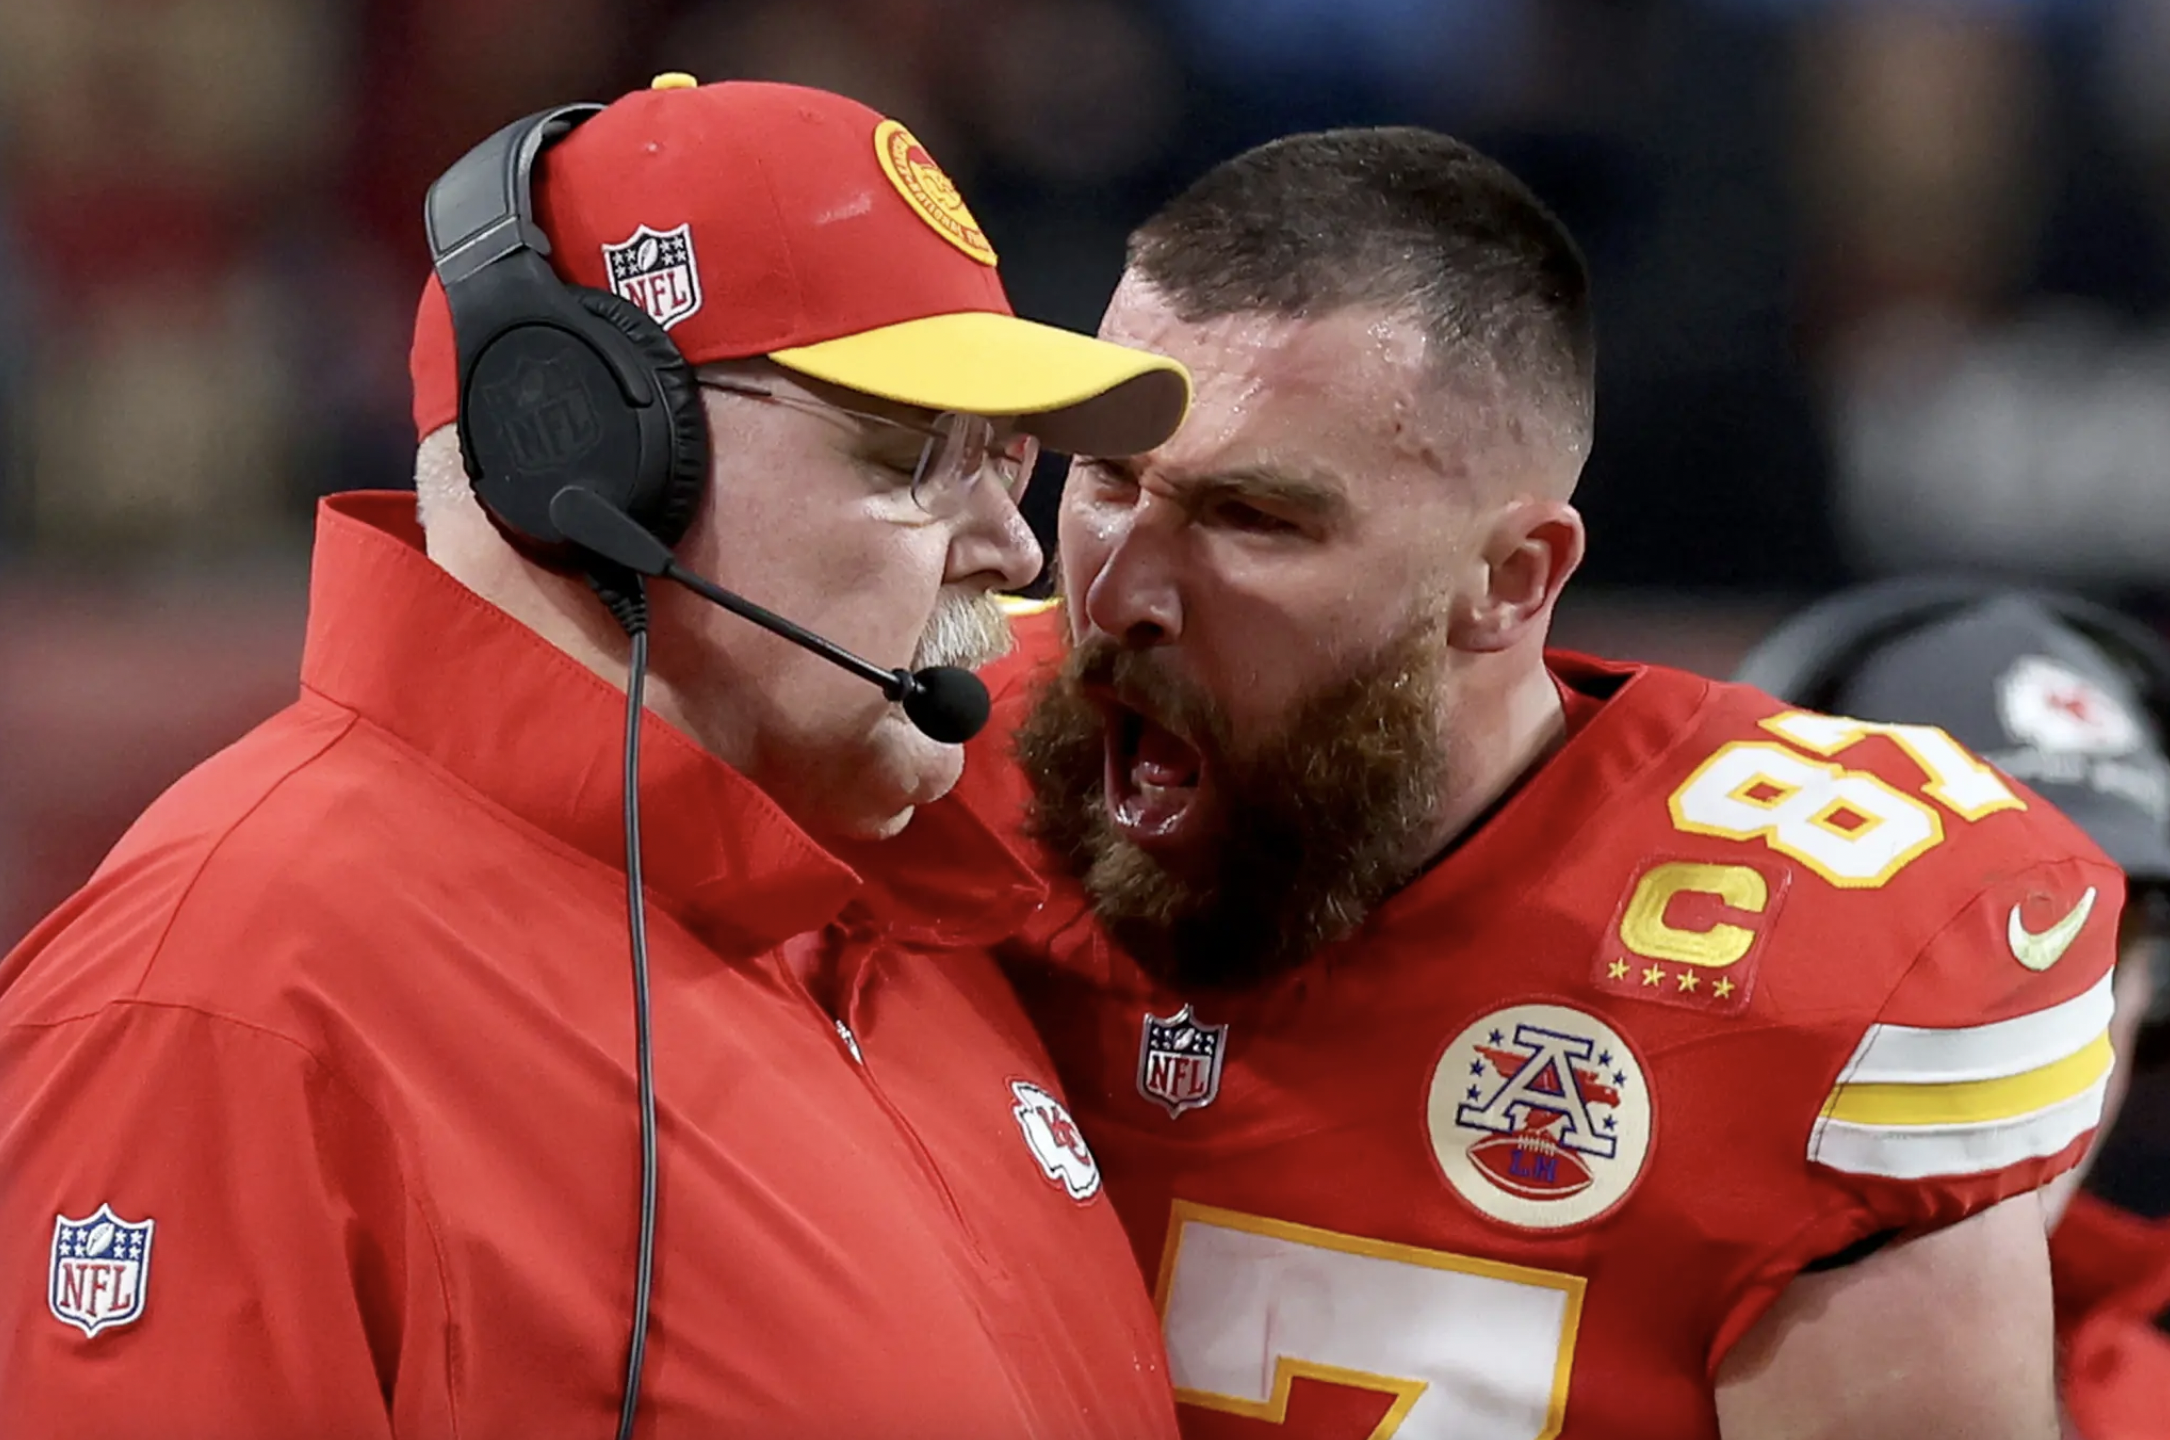 Kelce was spotted yelling at Chiefs coach Andy Reid | Photo courtesy of Getty Images